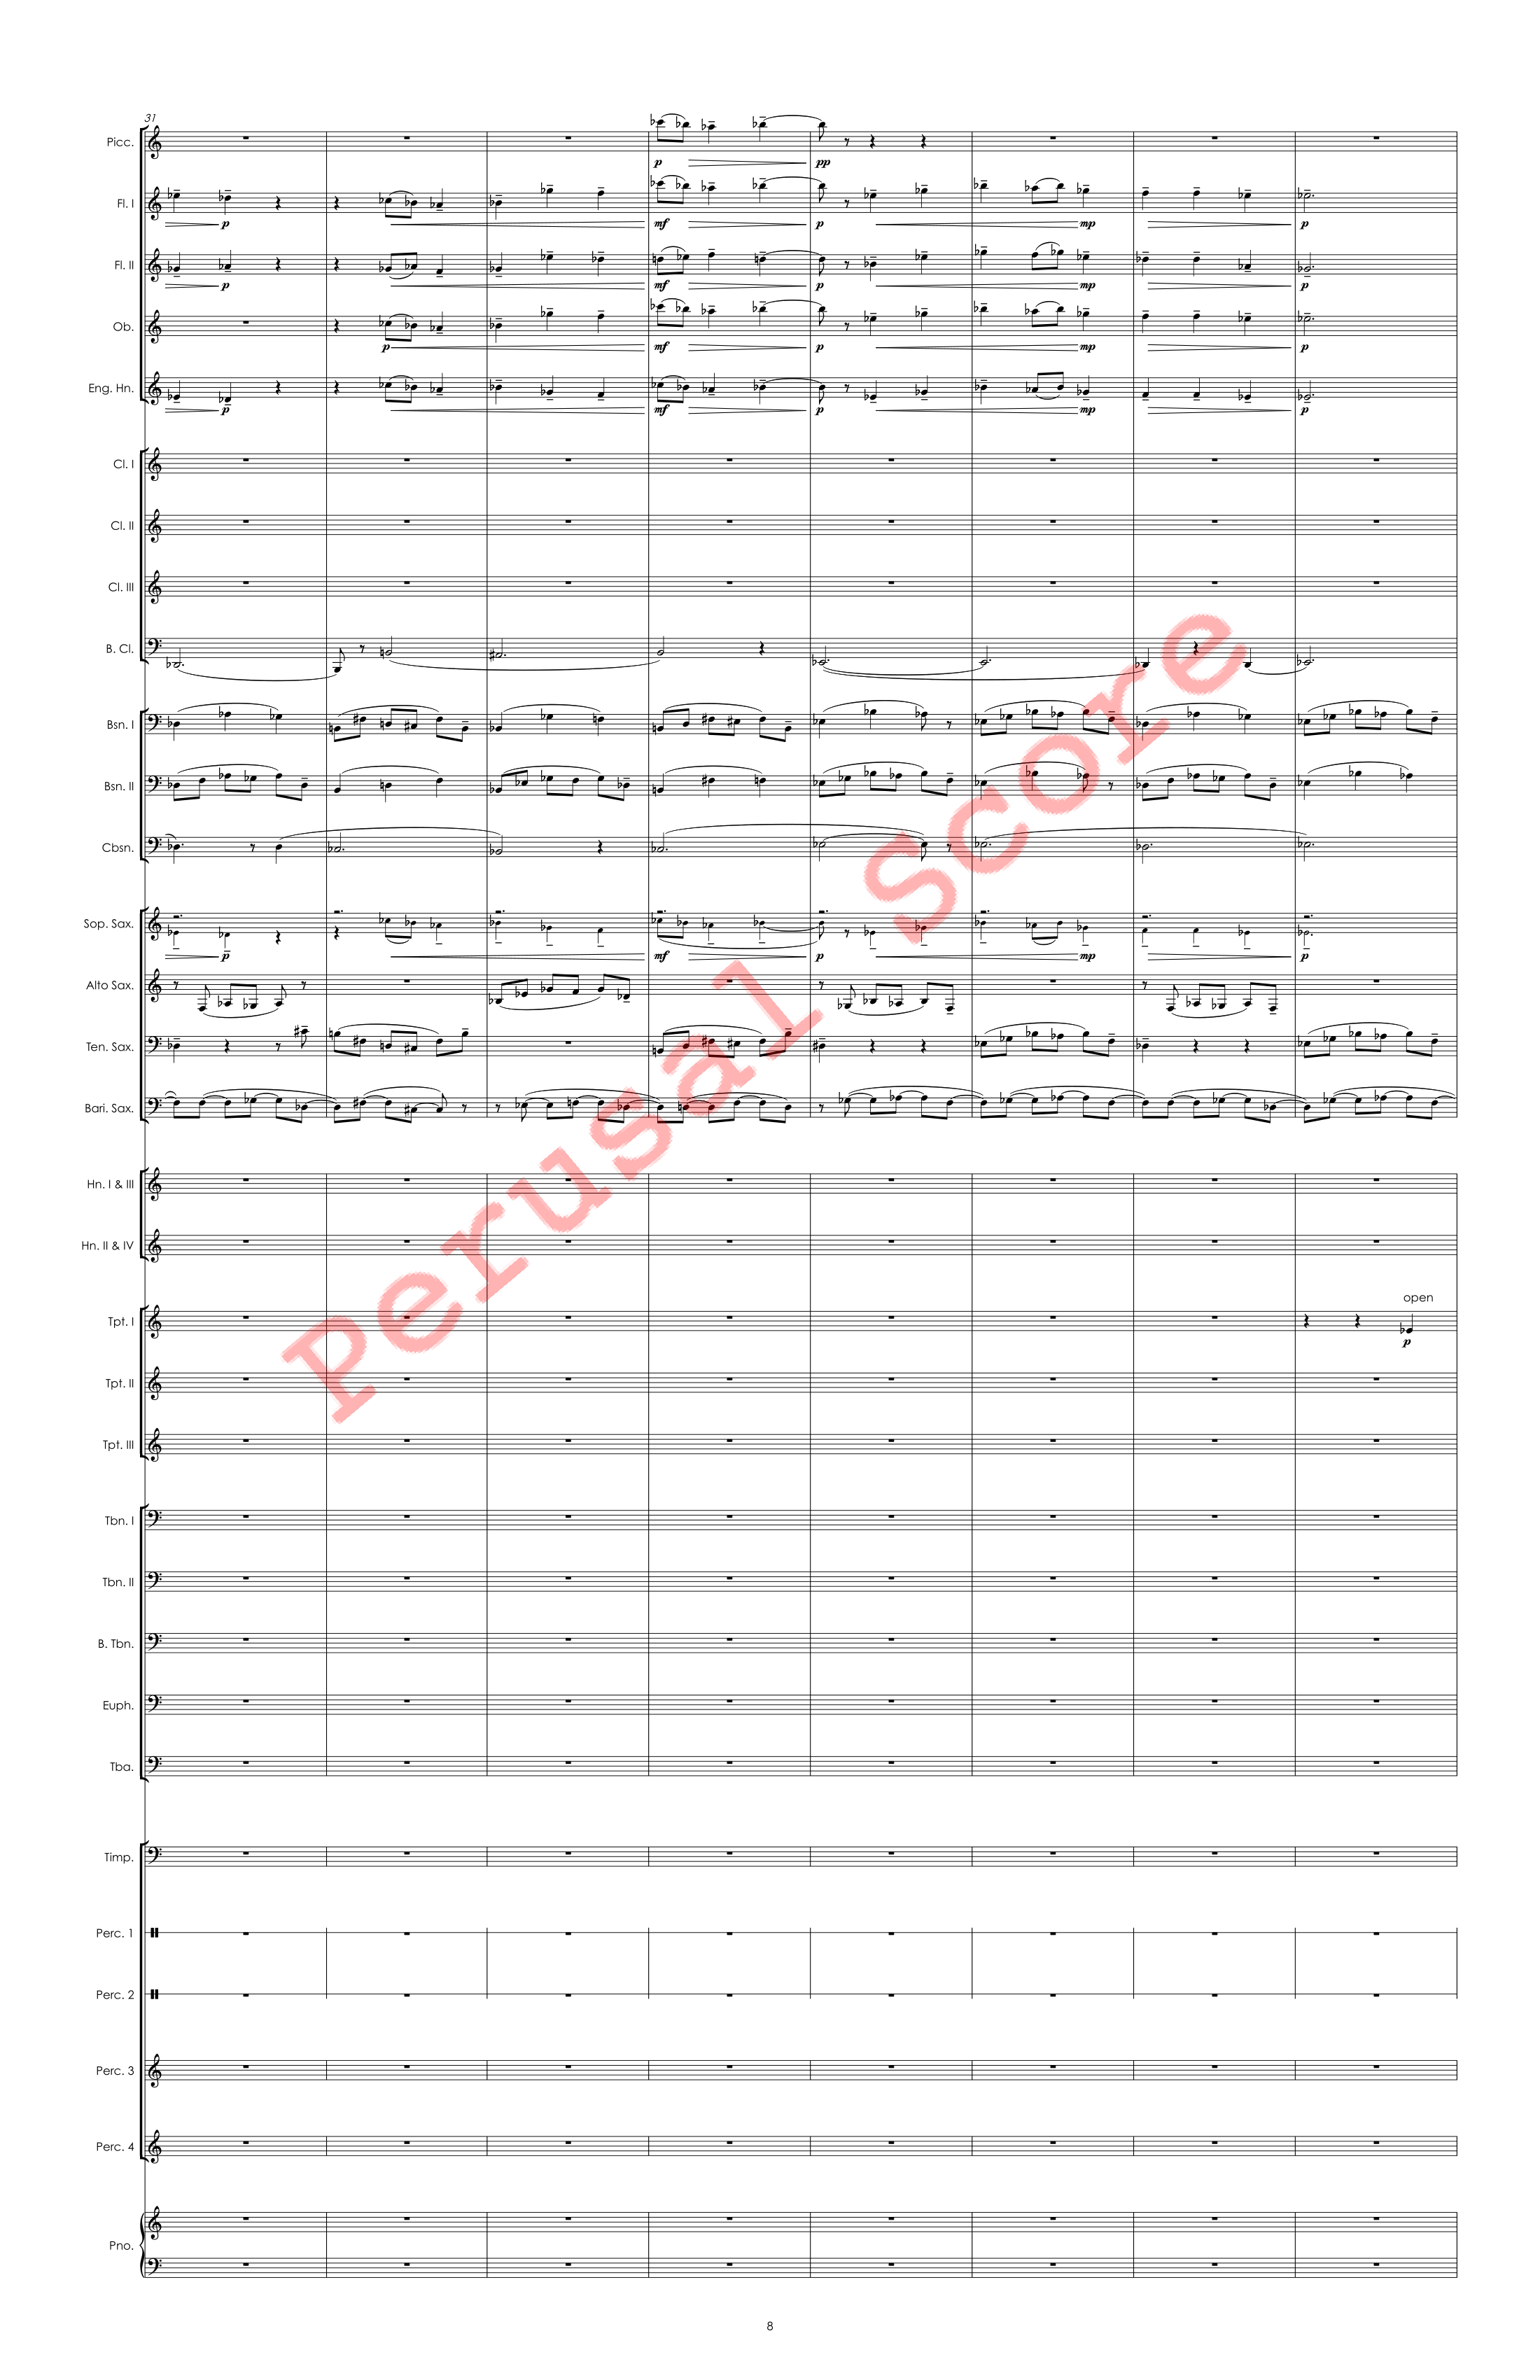 Canadian Folk Song - FINISHED 4.18.23- Full Score perusal score-08.png